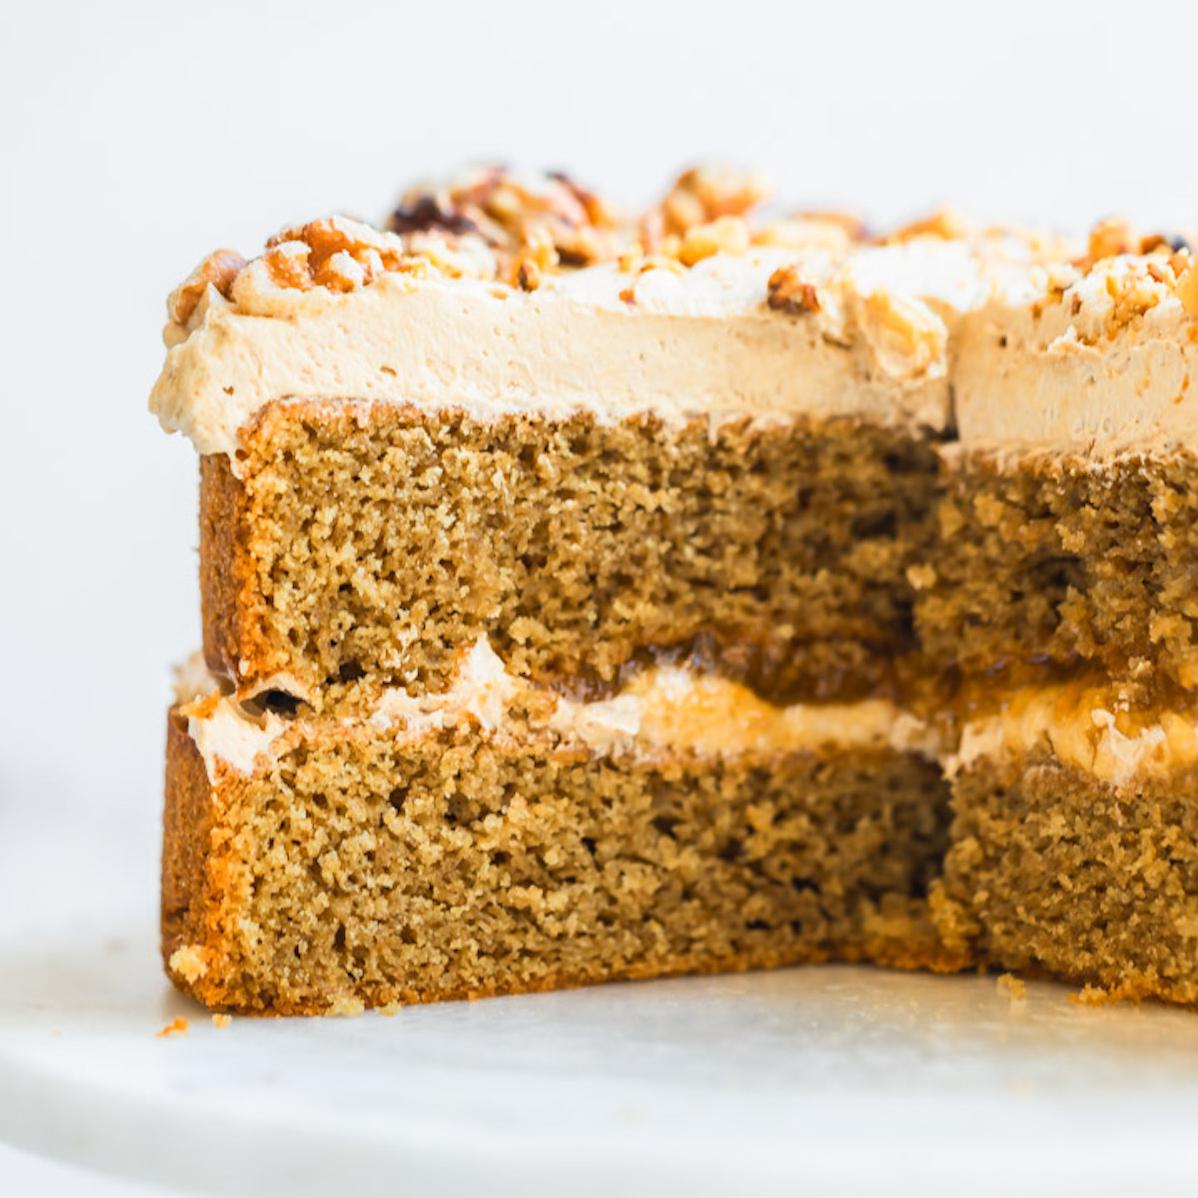  A slice of this coffee-infused cake is the perfect way to perk up your day.